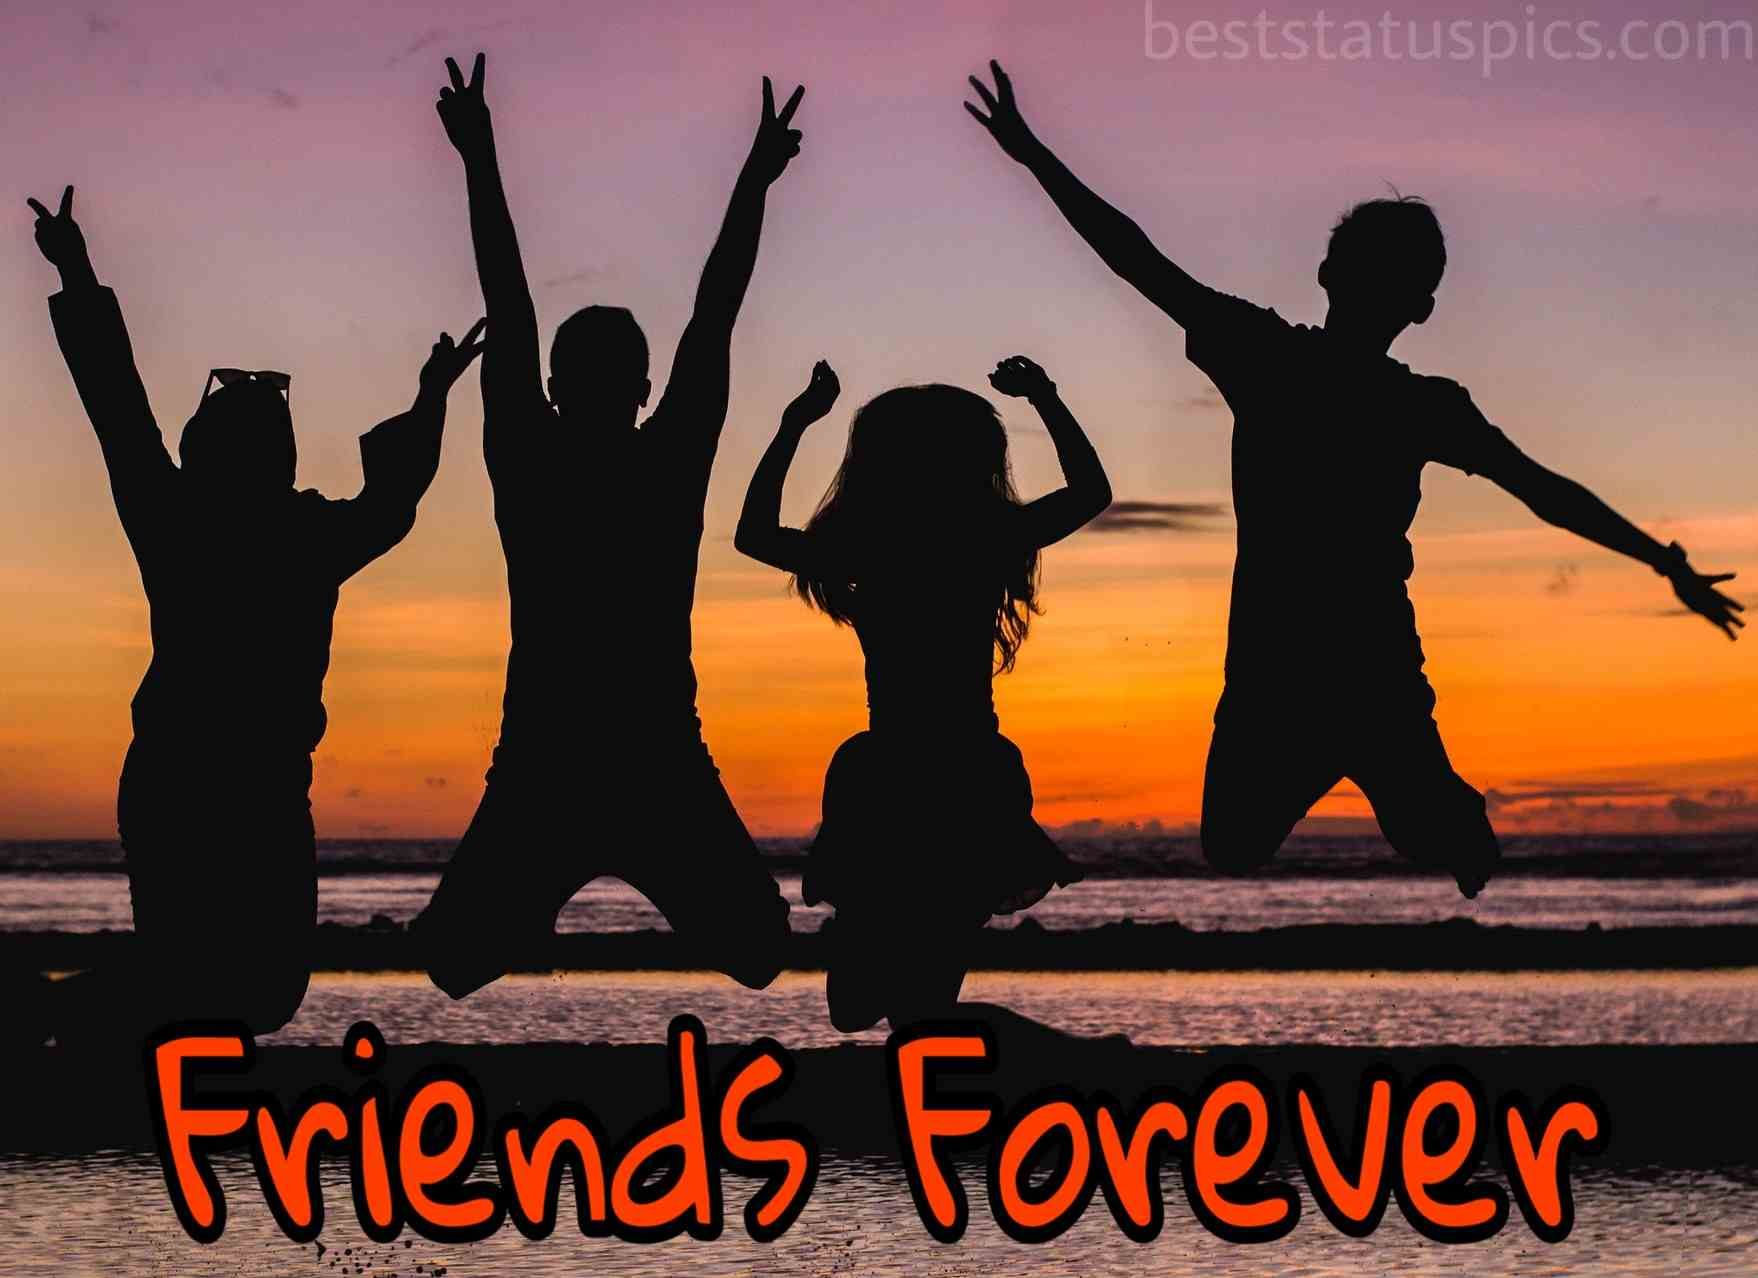 Whatsapp DP. Friends forever picture, Best friends forever image, Friends image